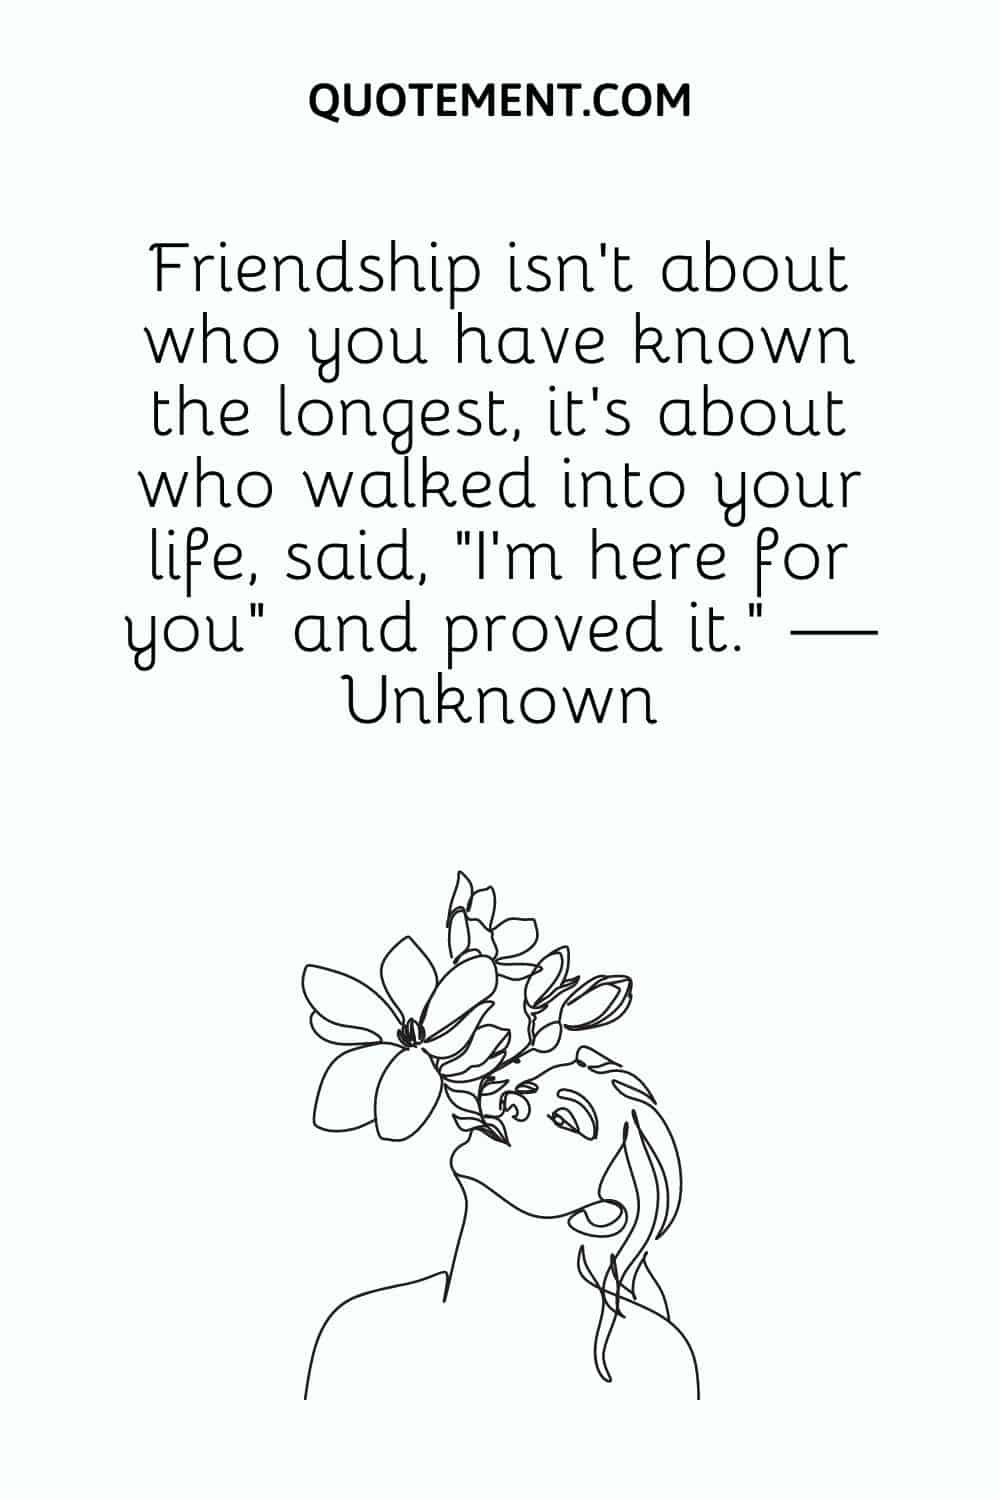 Friendship isn’t about who you have known the longest, it’s about who walked into your life, said, “I’m here for you” and proved it